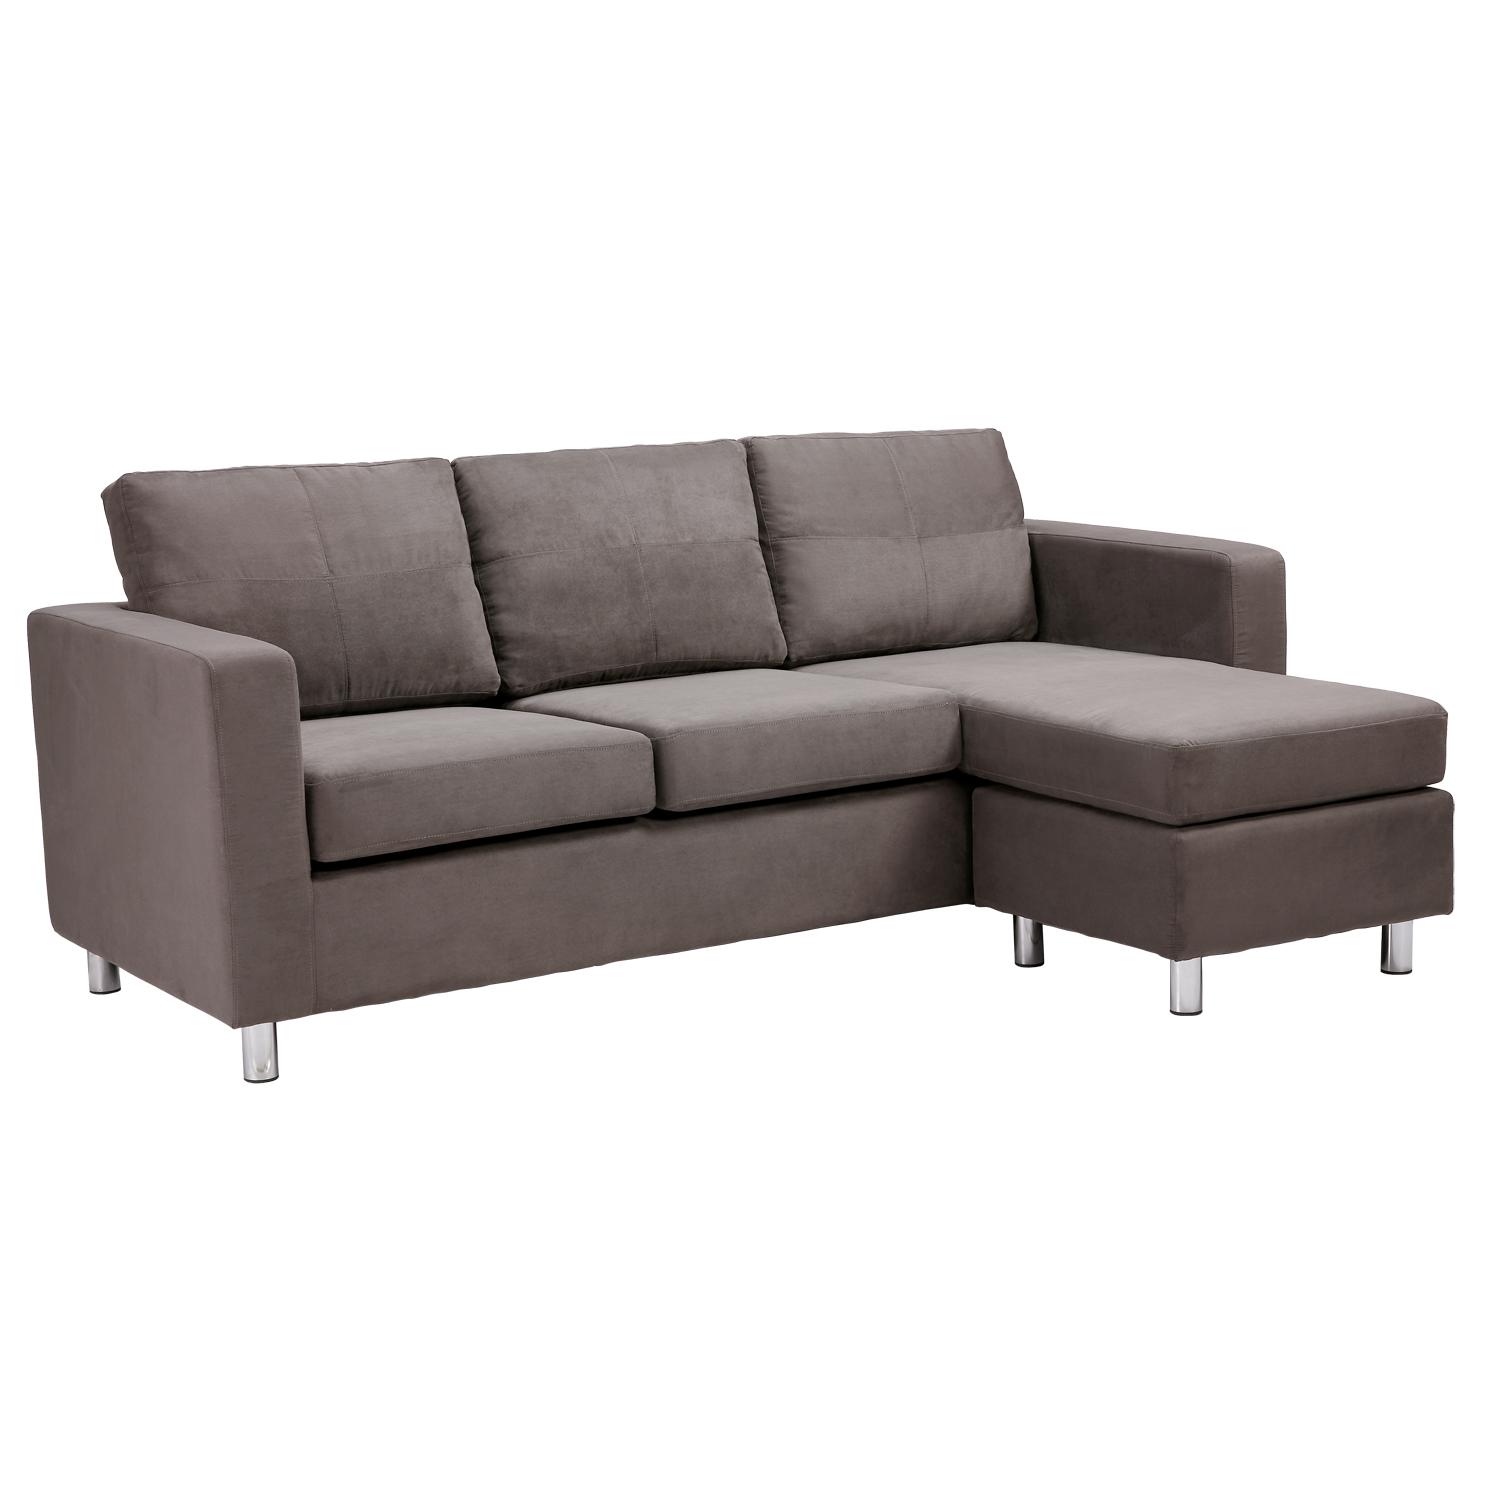 Awesome Modern Minimalist Design  Small  Sectional Sofa  in 